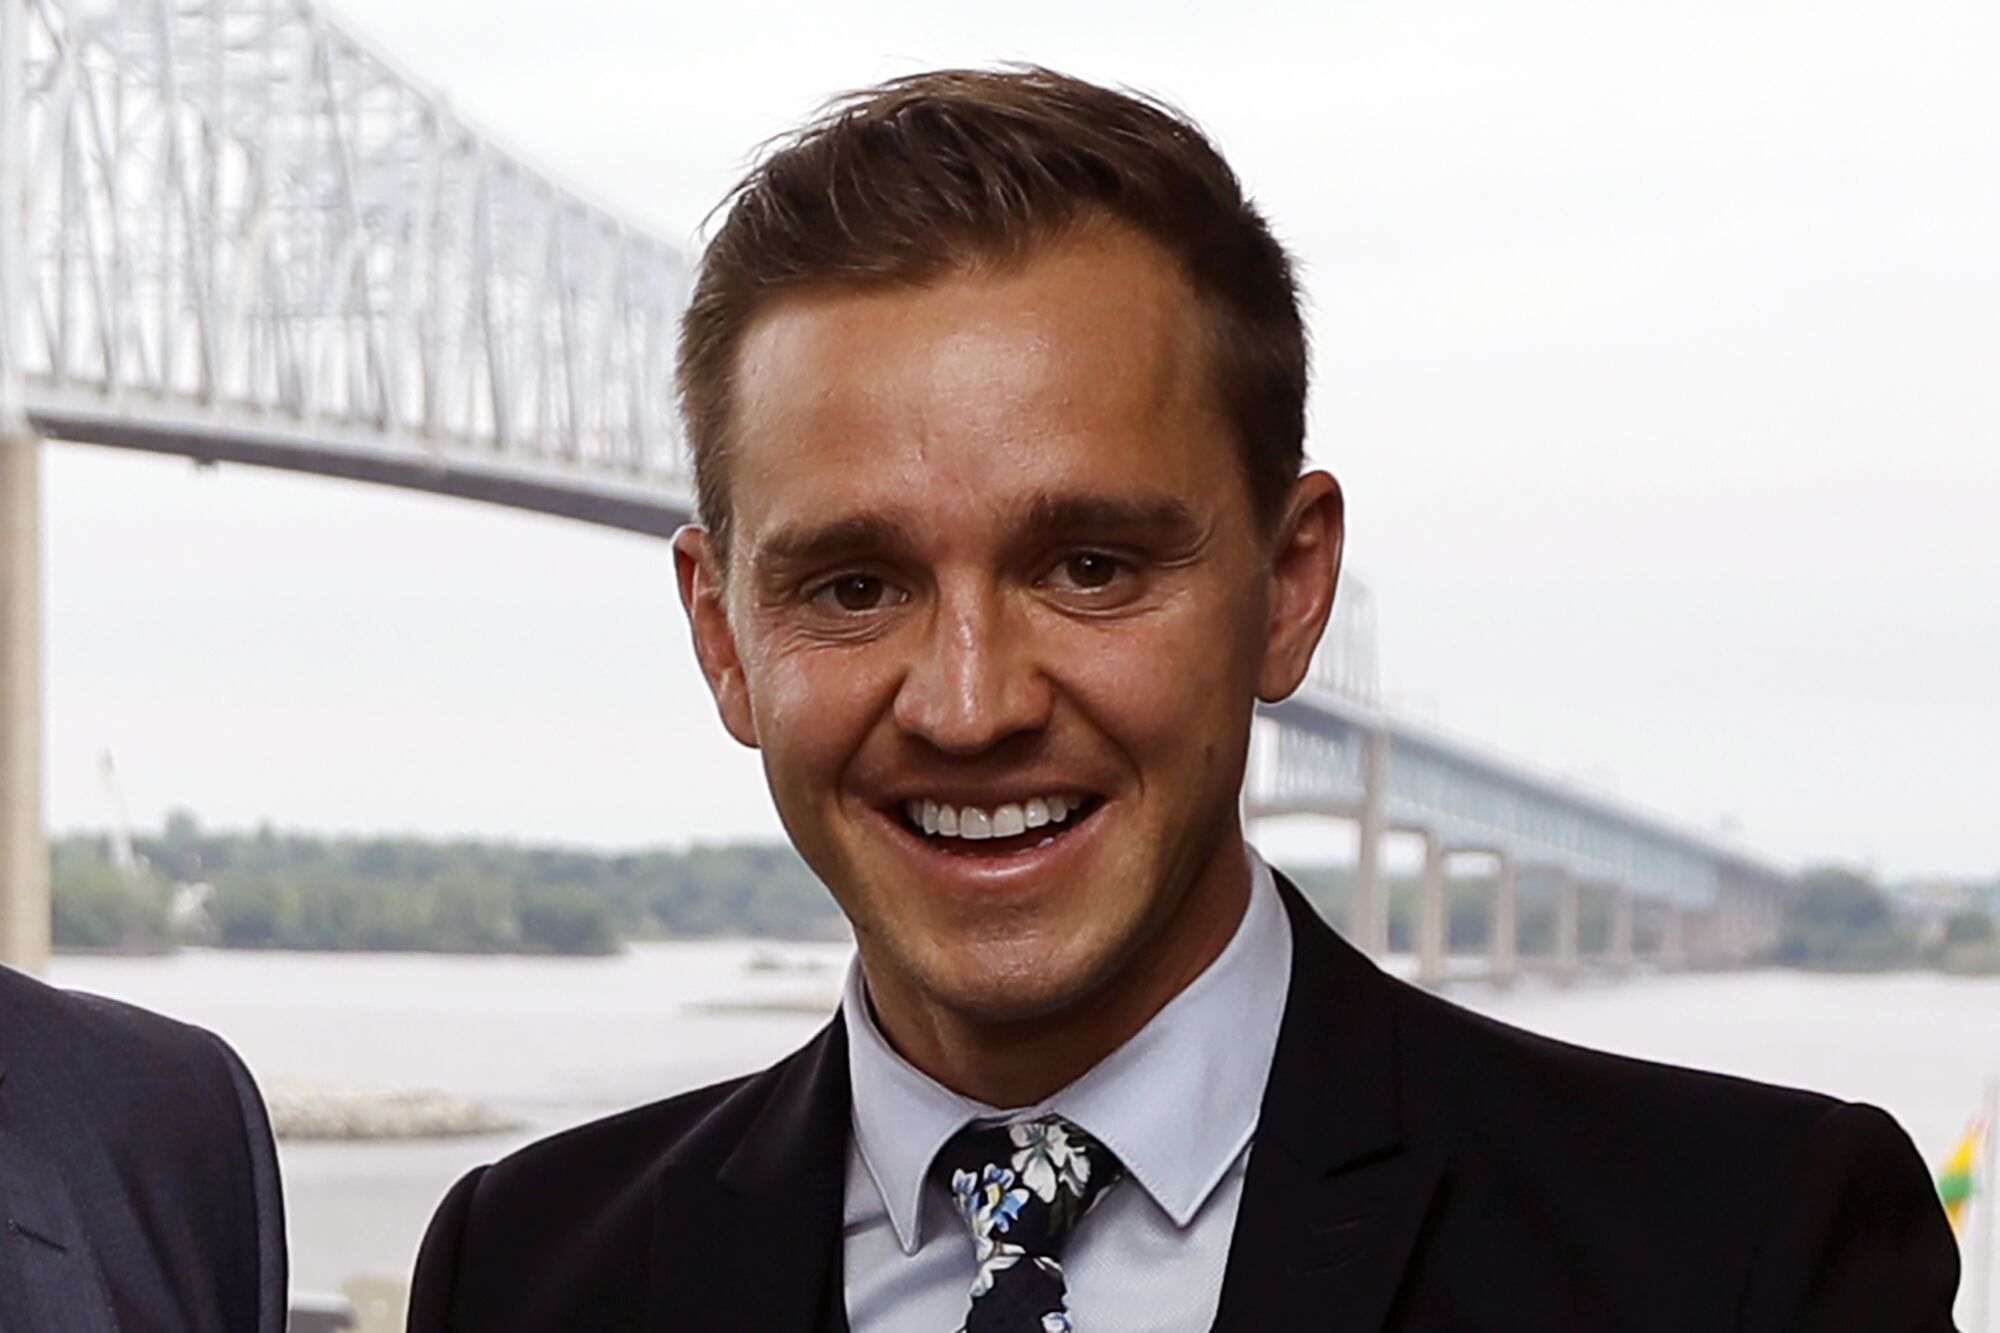 Fox Sports broadcaster Stuart Holden poses before a friendly soccer match between the U.S. and Bolivia in Chester, Pa on May 28, 2018.